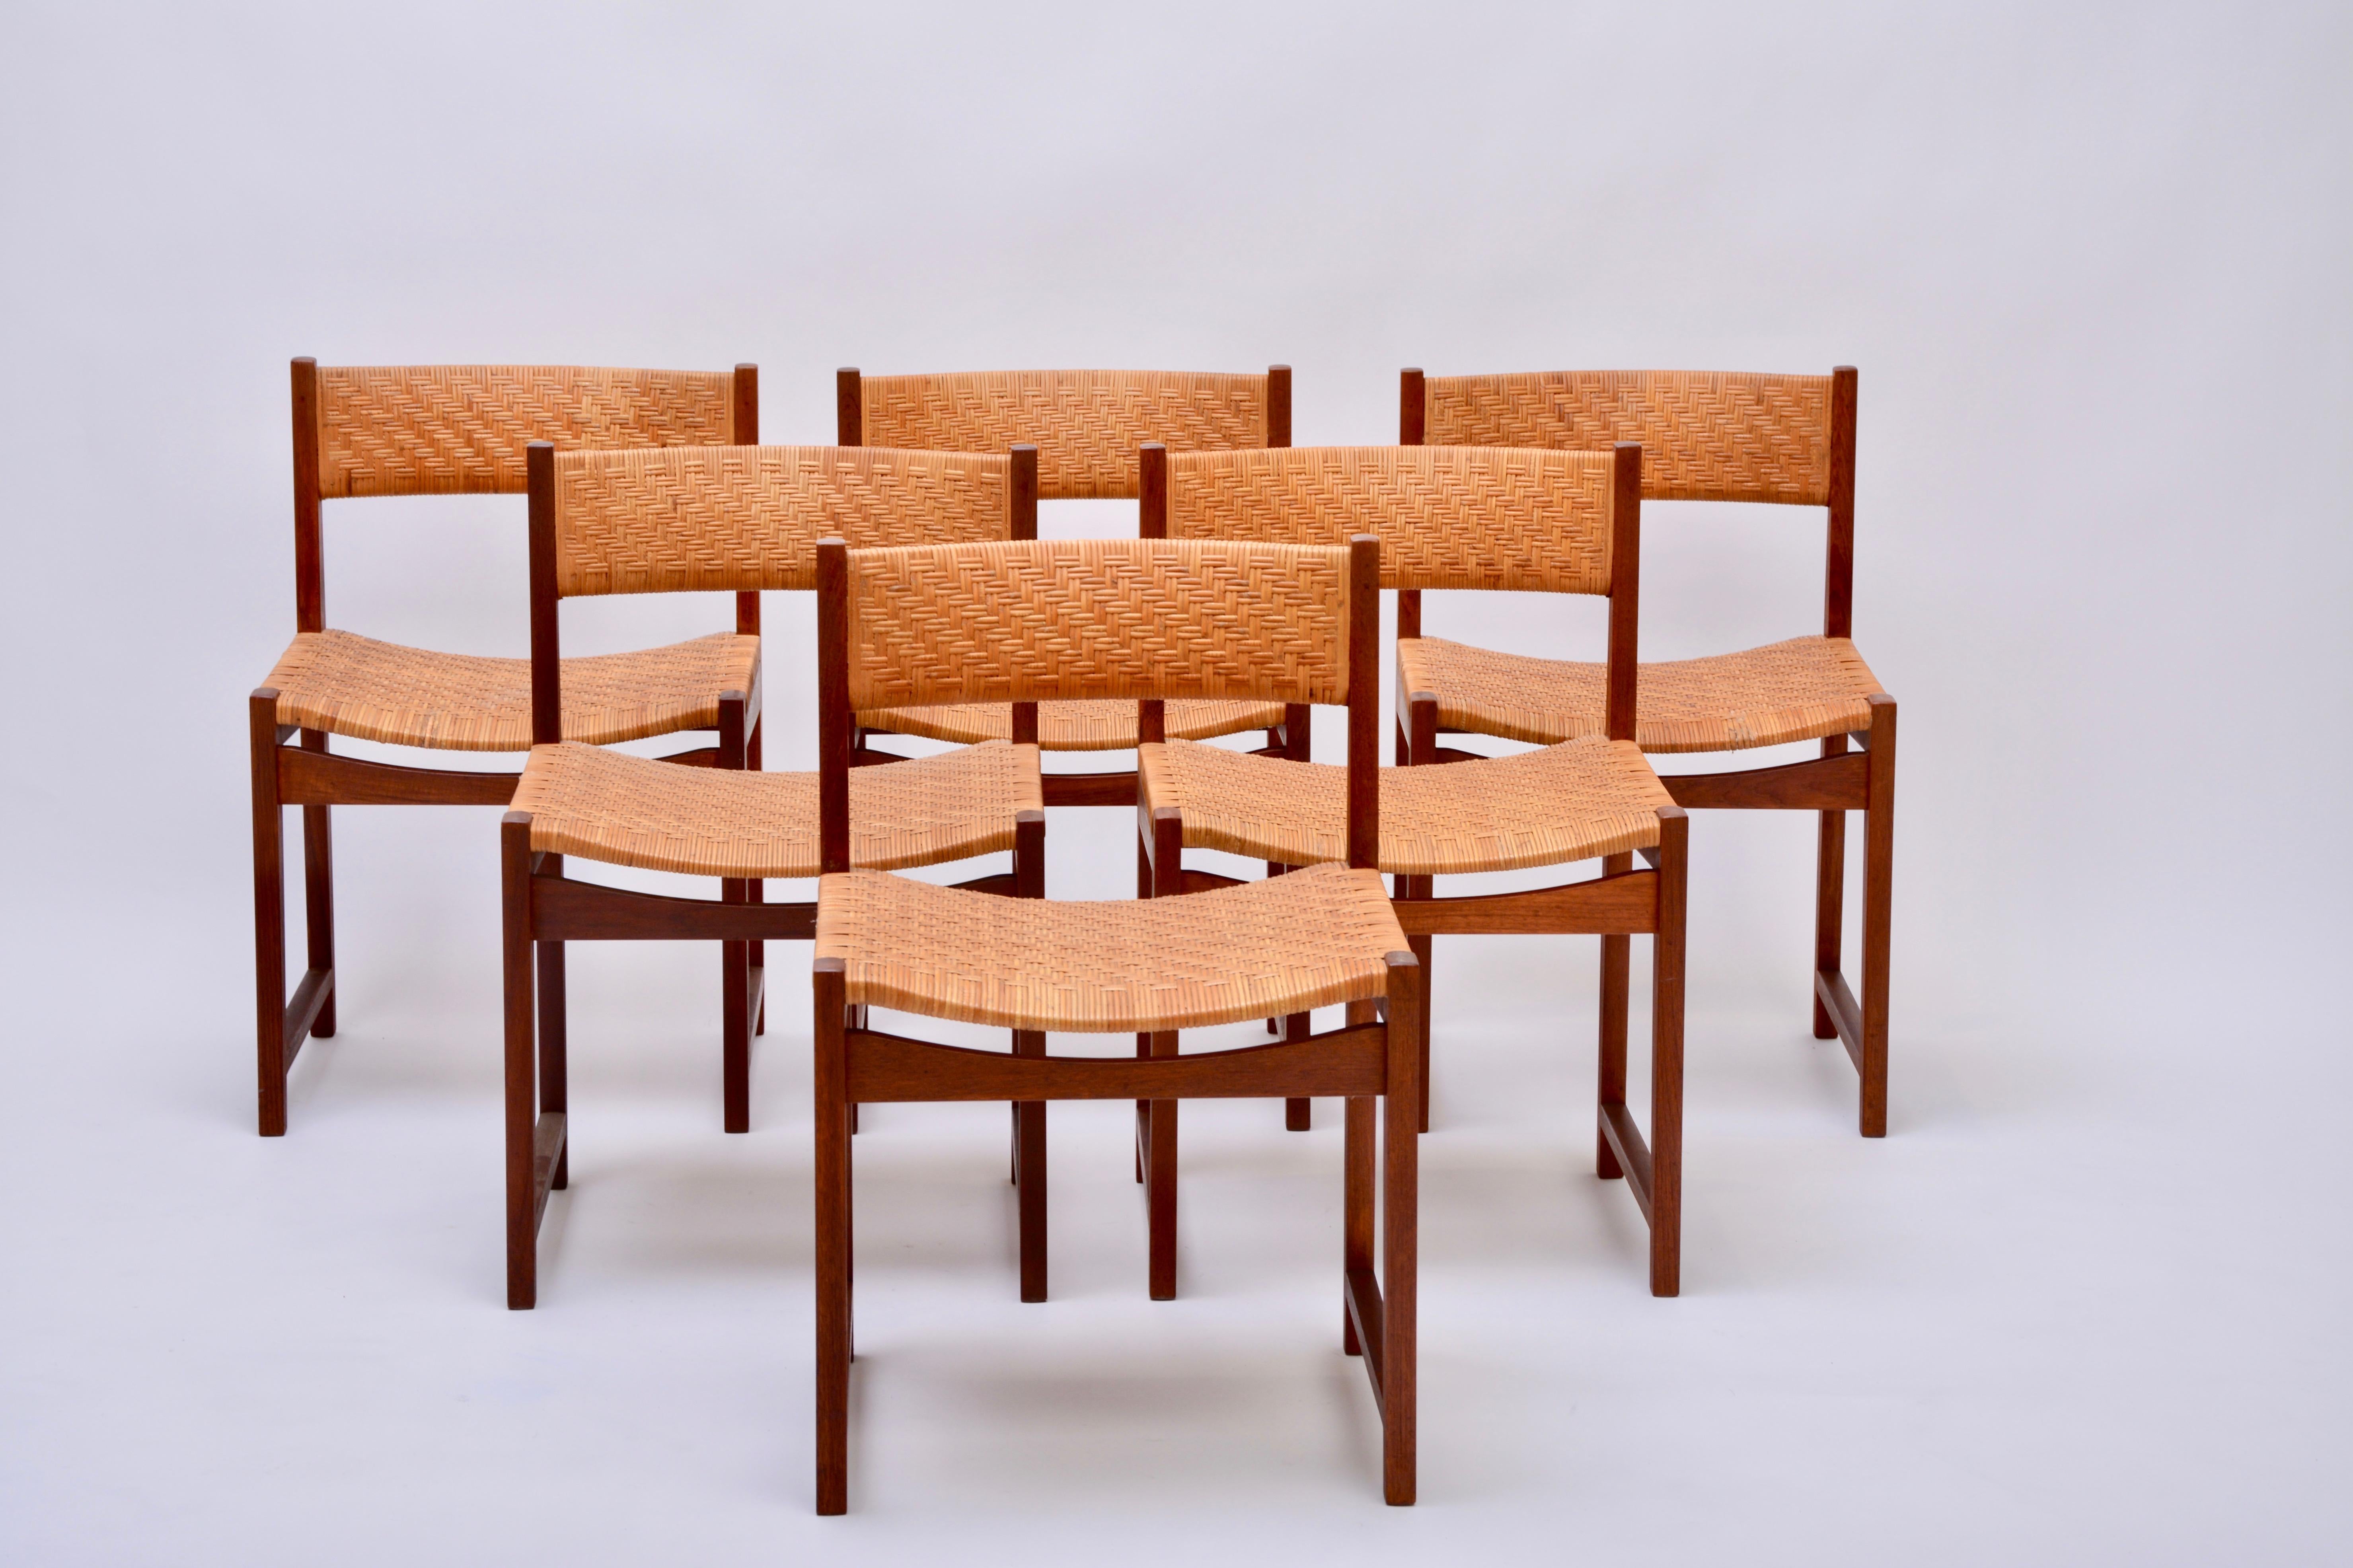 Danish Mid-Century Modern chairs by Hvidt & Mølgaard Nielsen in Teak and Cane

Set of 6 chairs model no. 350 designed by Peter Hvidt & Orla Mølgaard-Nielsen and produced by Søborg Møbelfabrik, Denmark, in the 1960s. The chairs are made of teak and